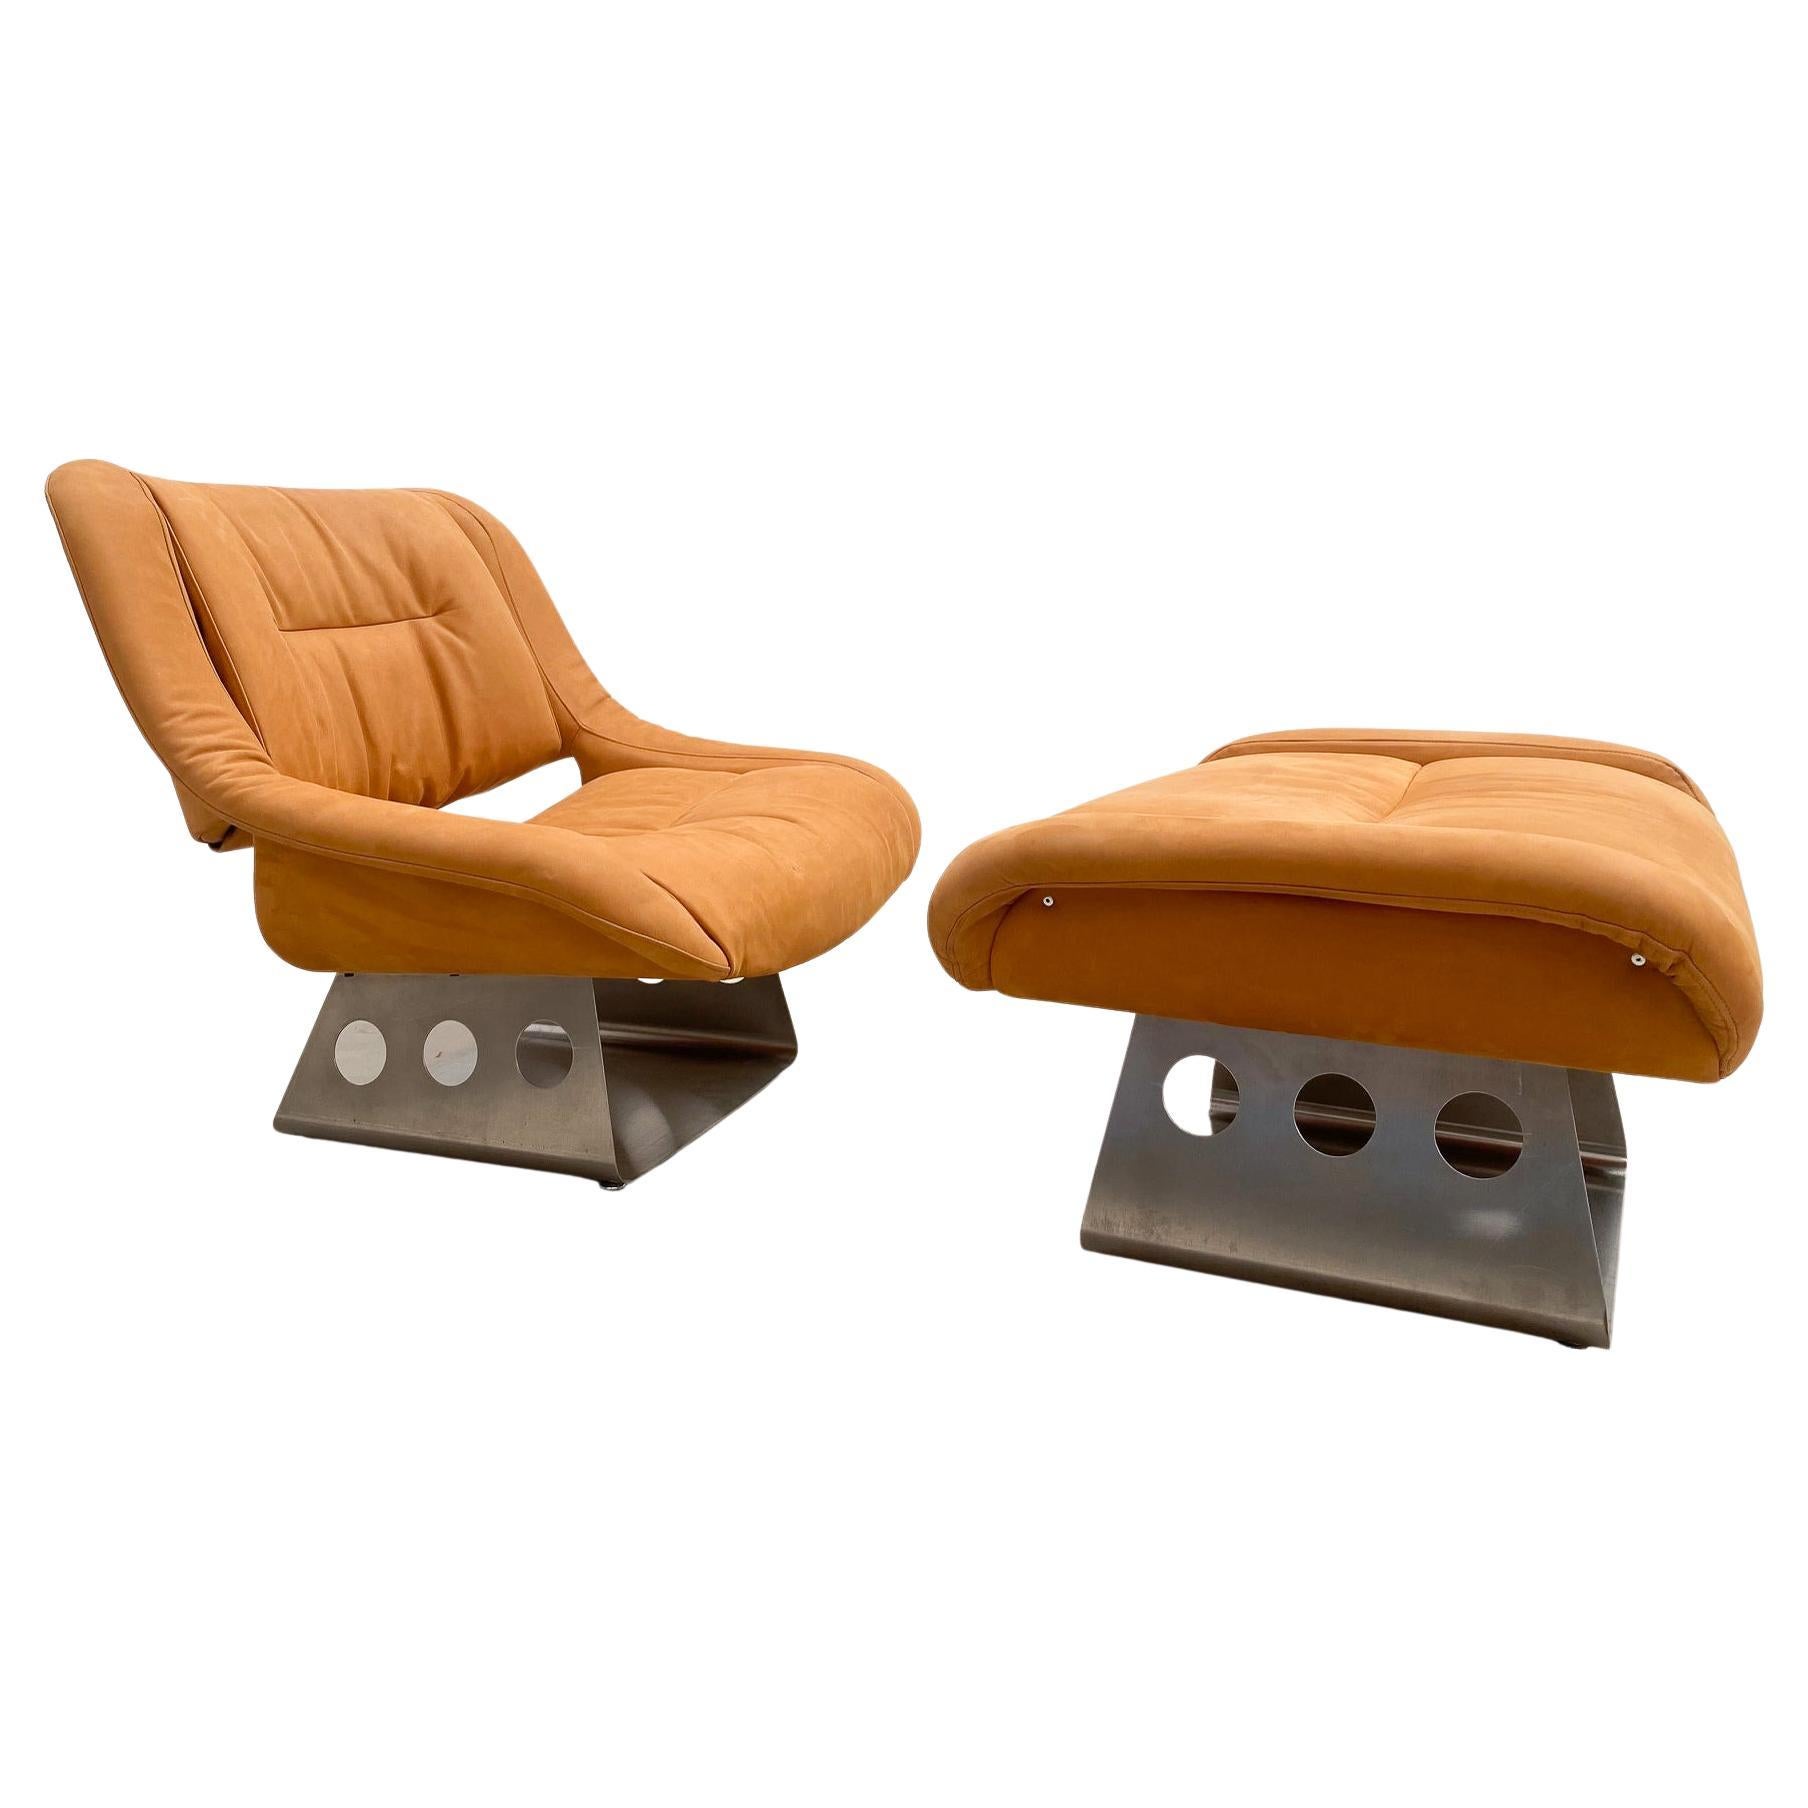 Mid-Century Lounge Chair and Ottoman, Italy, 1970s - New Leather Upholstery For Sale